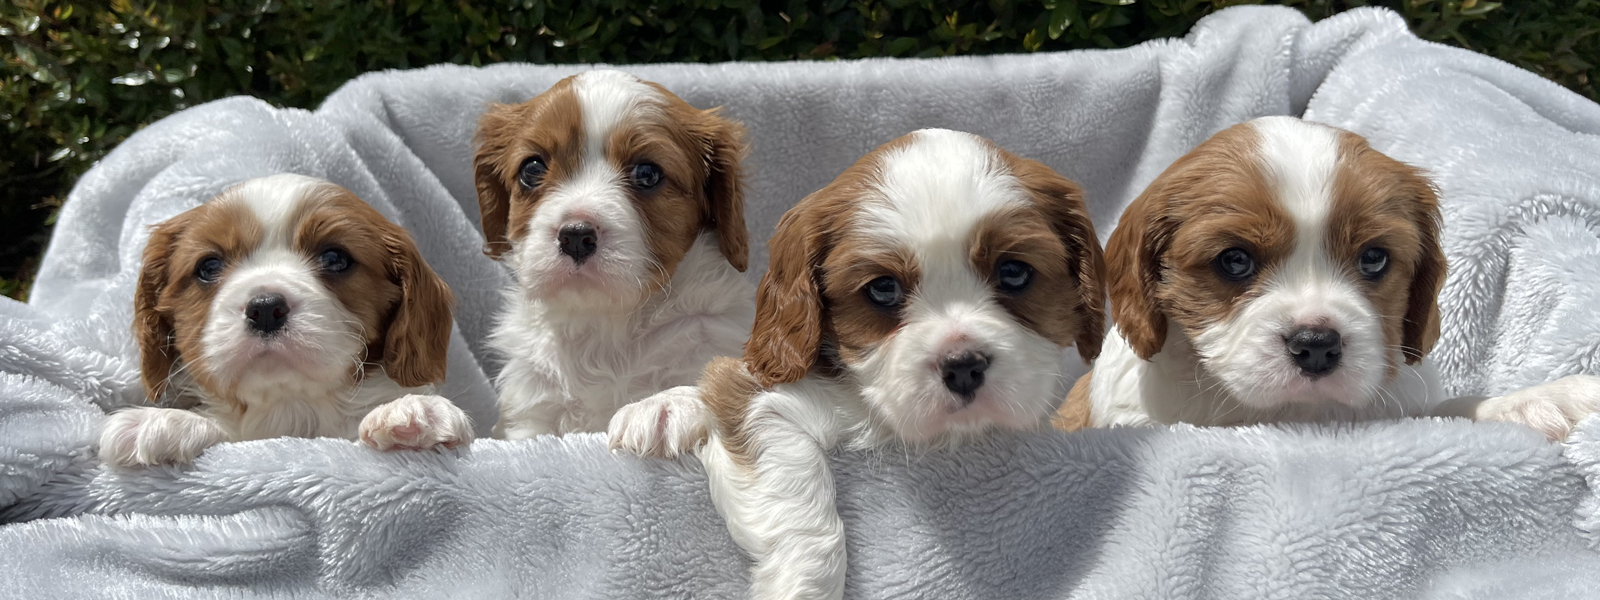 Cavalier King Charles Spaniel Puppies for Sale Melbourne